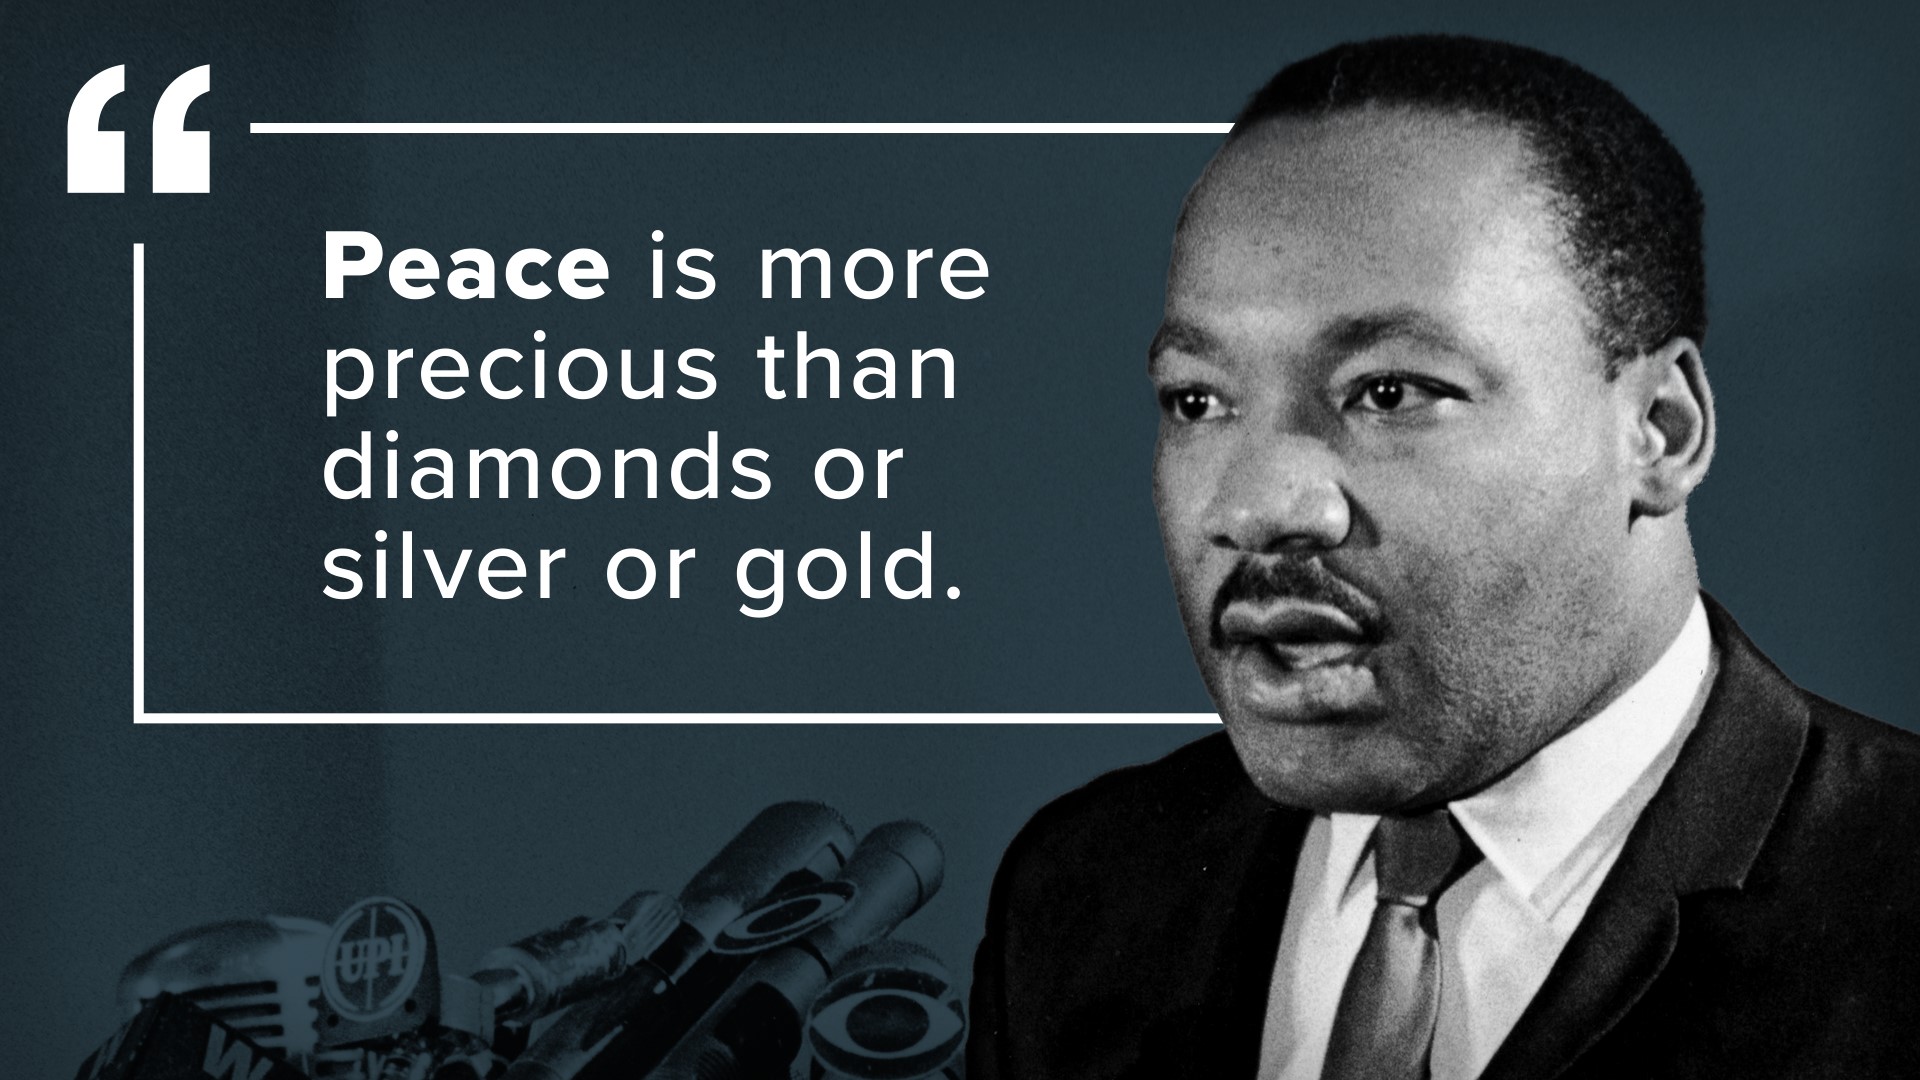 MLK quotes that still ring clear today | 11alive.com